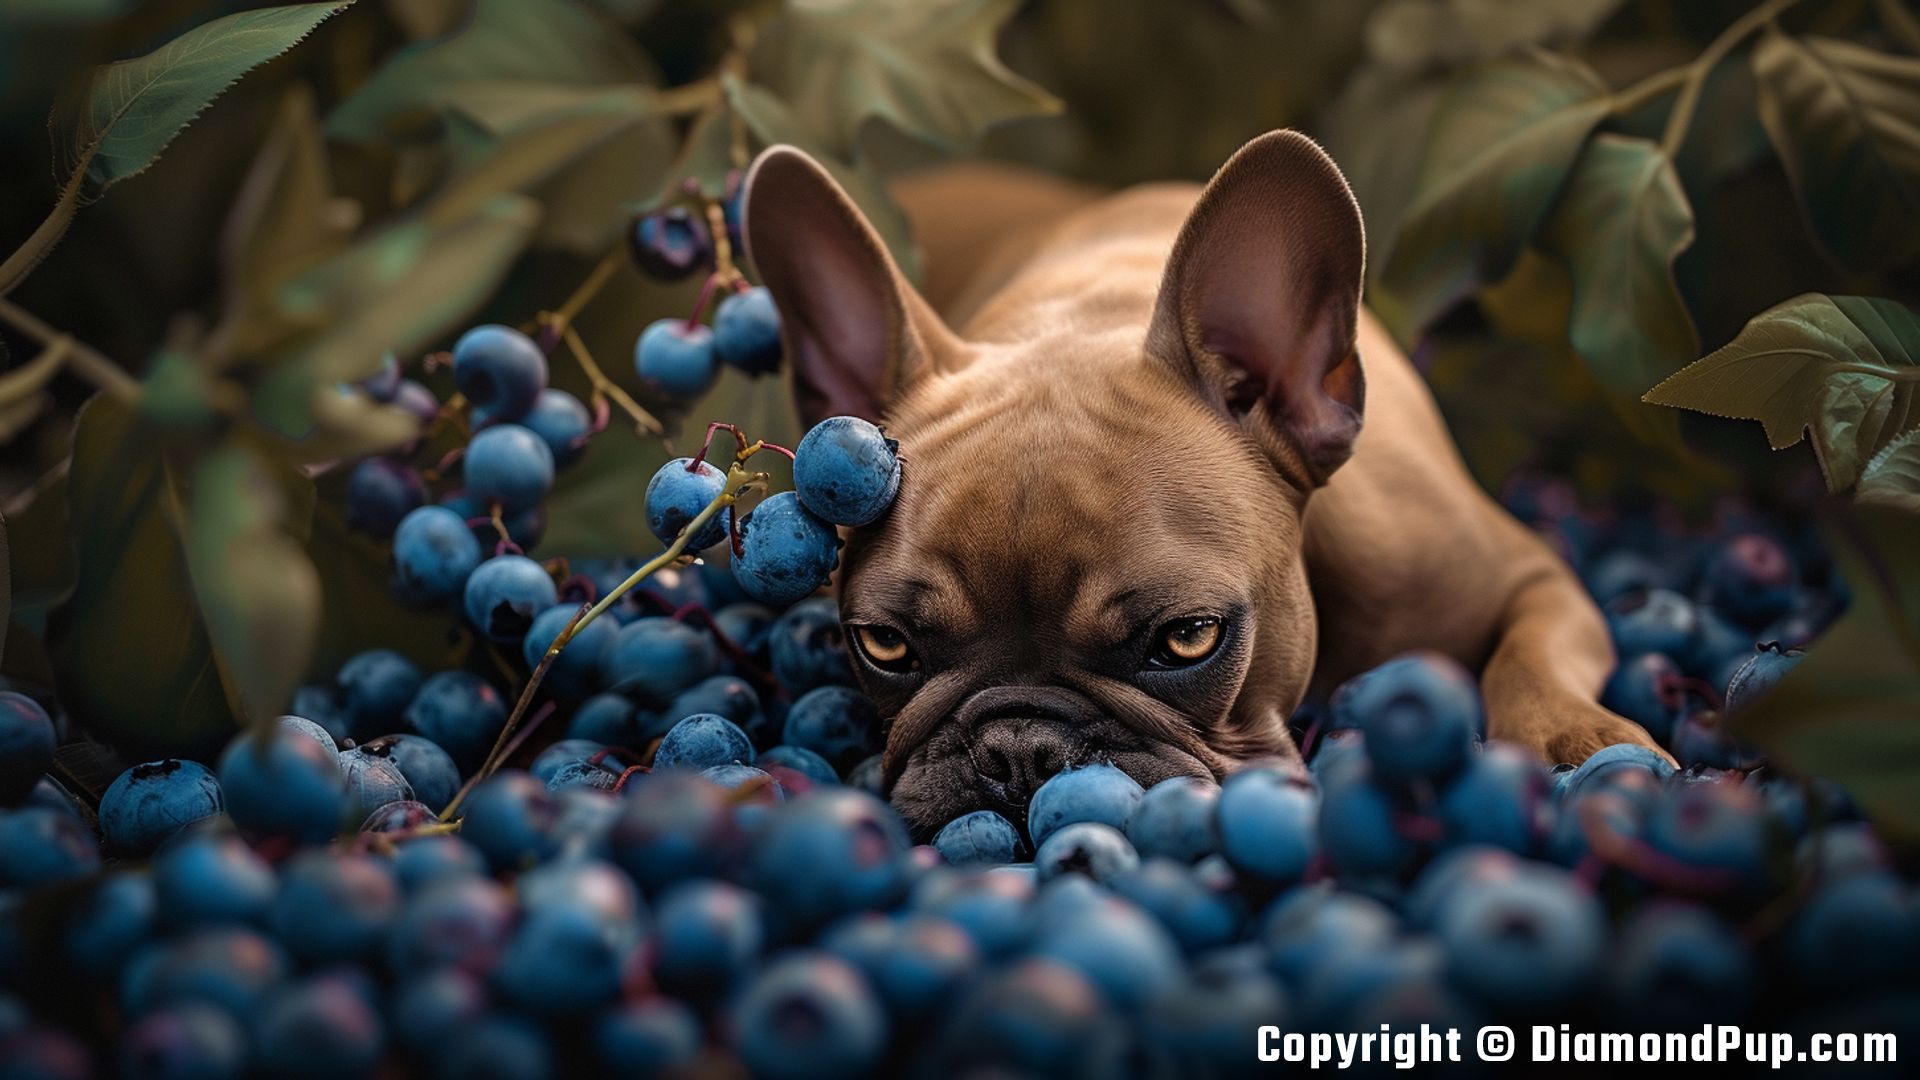 Photograph of an Adorable French Bulldog Eating Blueberries